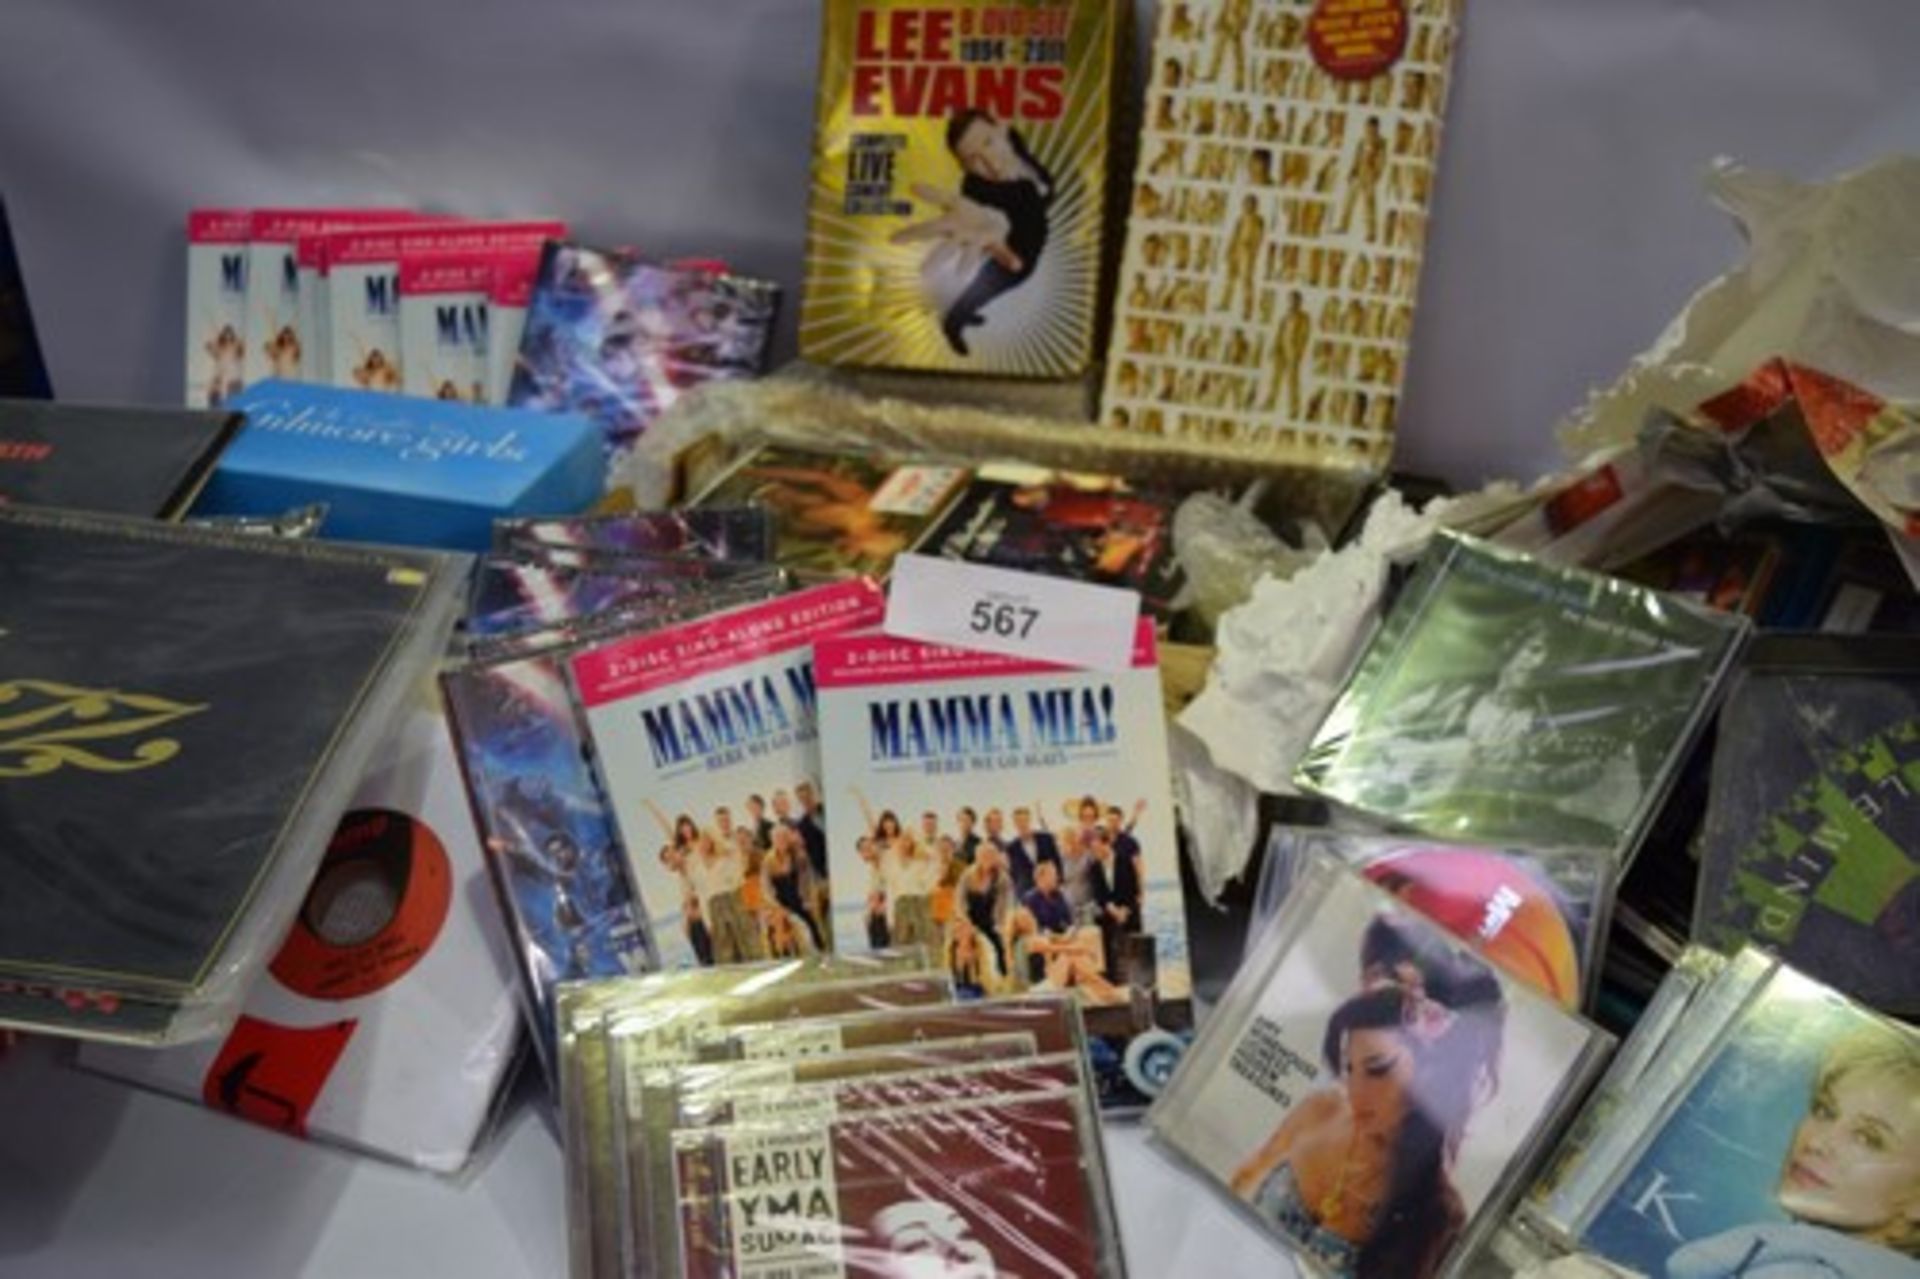 A large selection of CD's and DVD's including Mamma Mia, The Gilmore girls, Star Wars, Bon Jovi, and